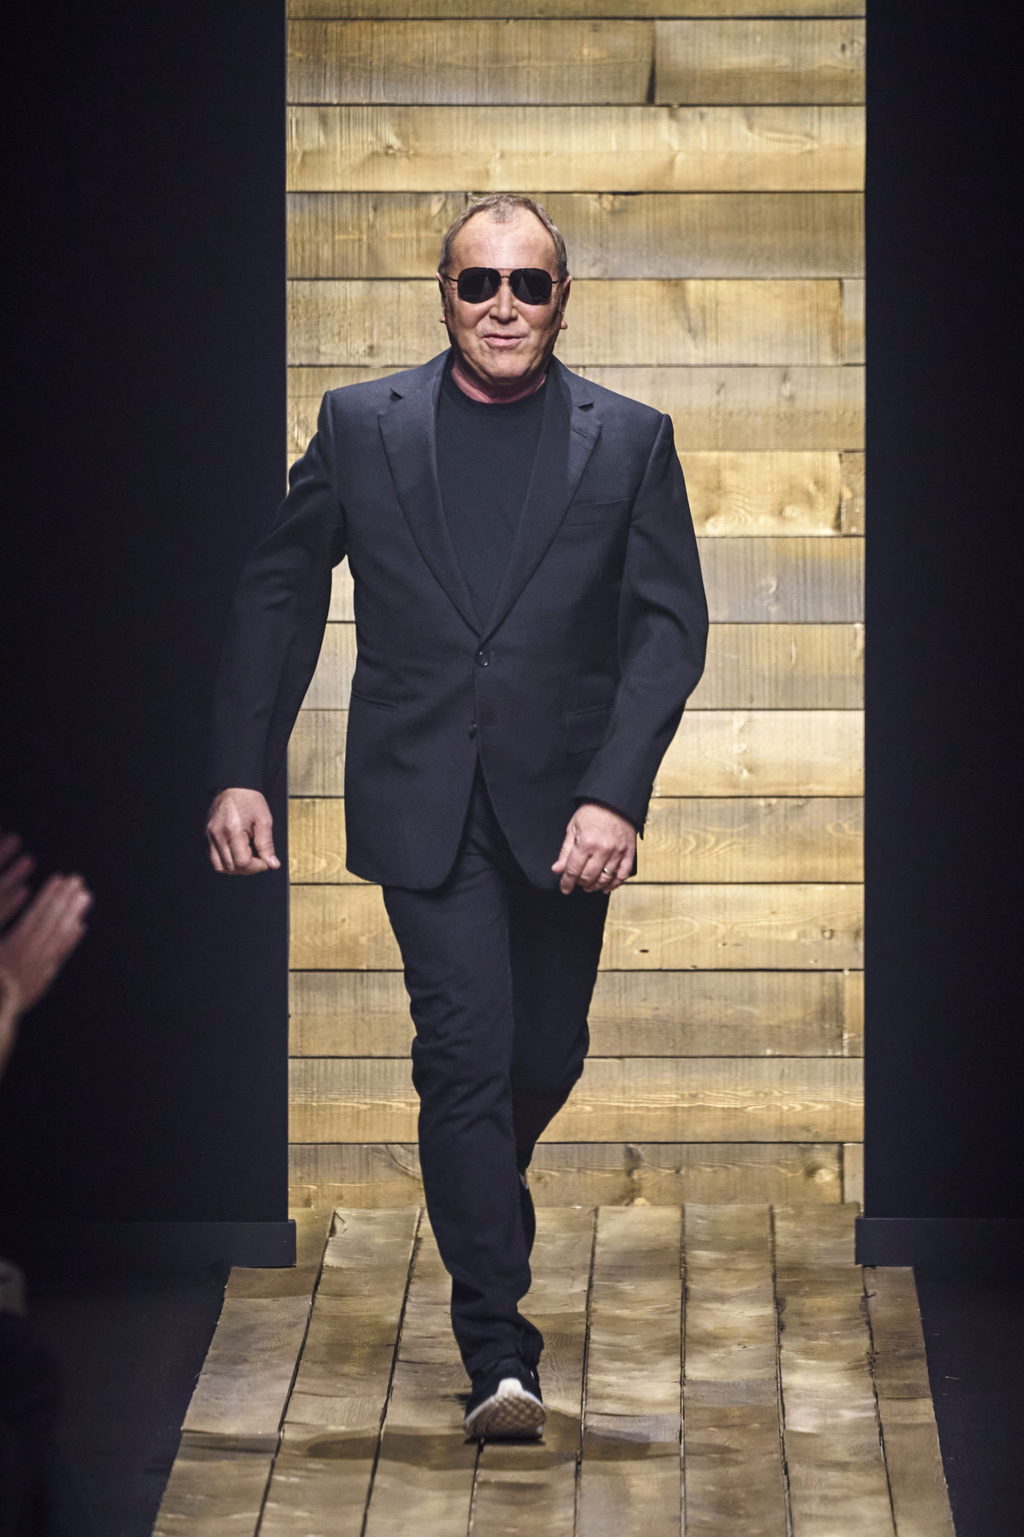 Geleend onderpand intern Know Your Fashion Designers: 10 Facts About Michael Kors - College Fashion